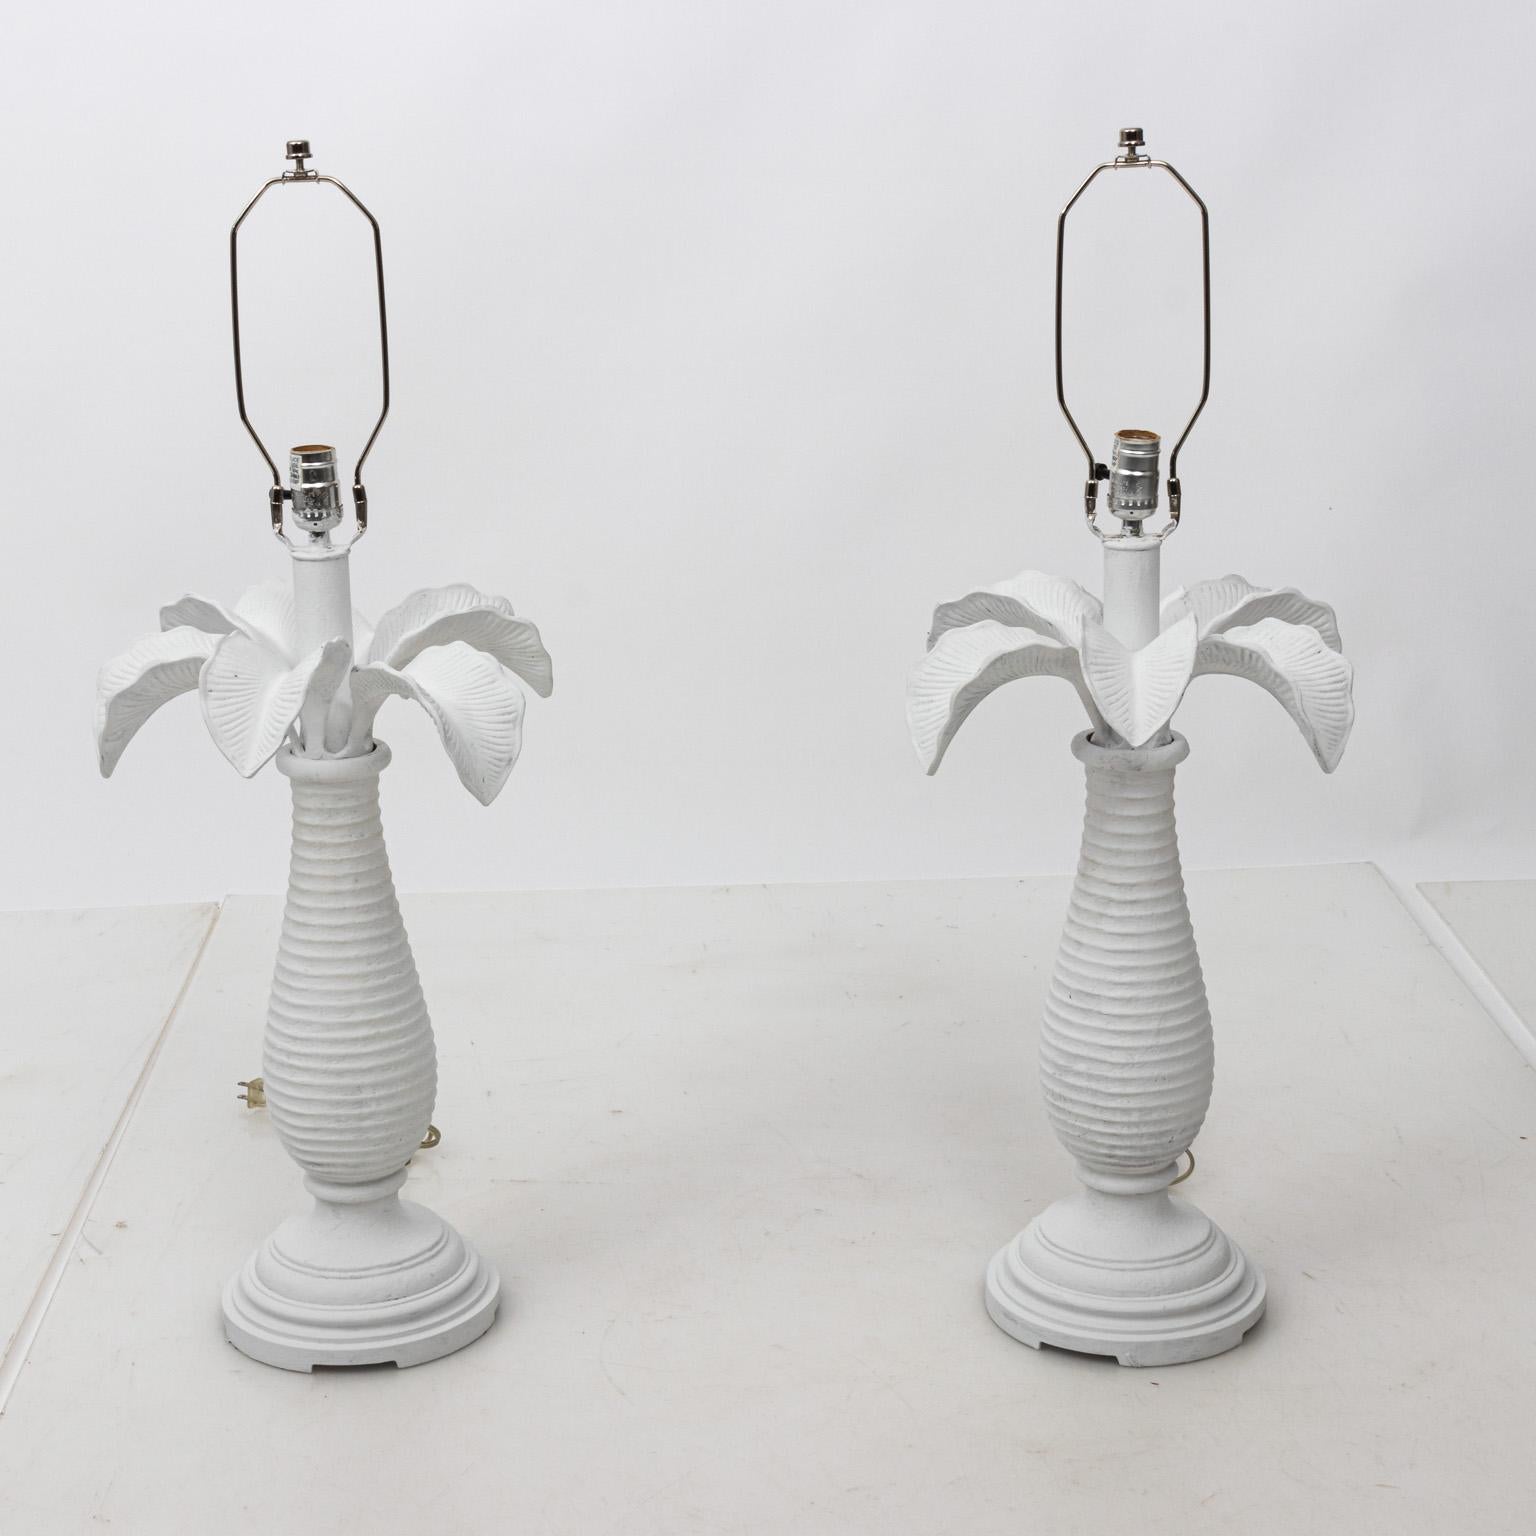 Pair of white plaster palm tree shaped table lamps with vase turned base. Shades not included. Please note of wear consistent with age including minor chips to white finish.